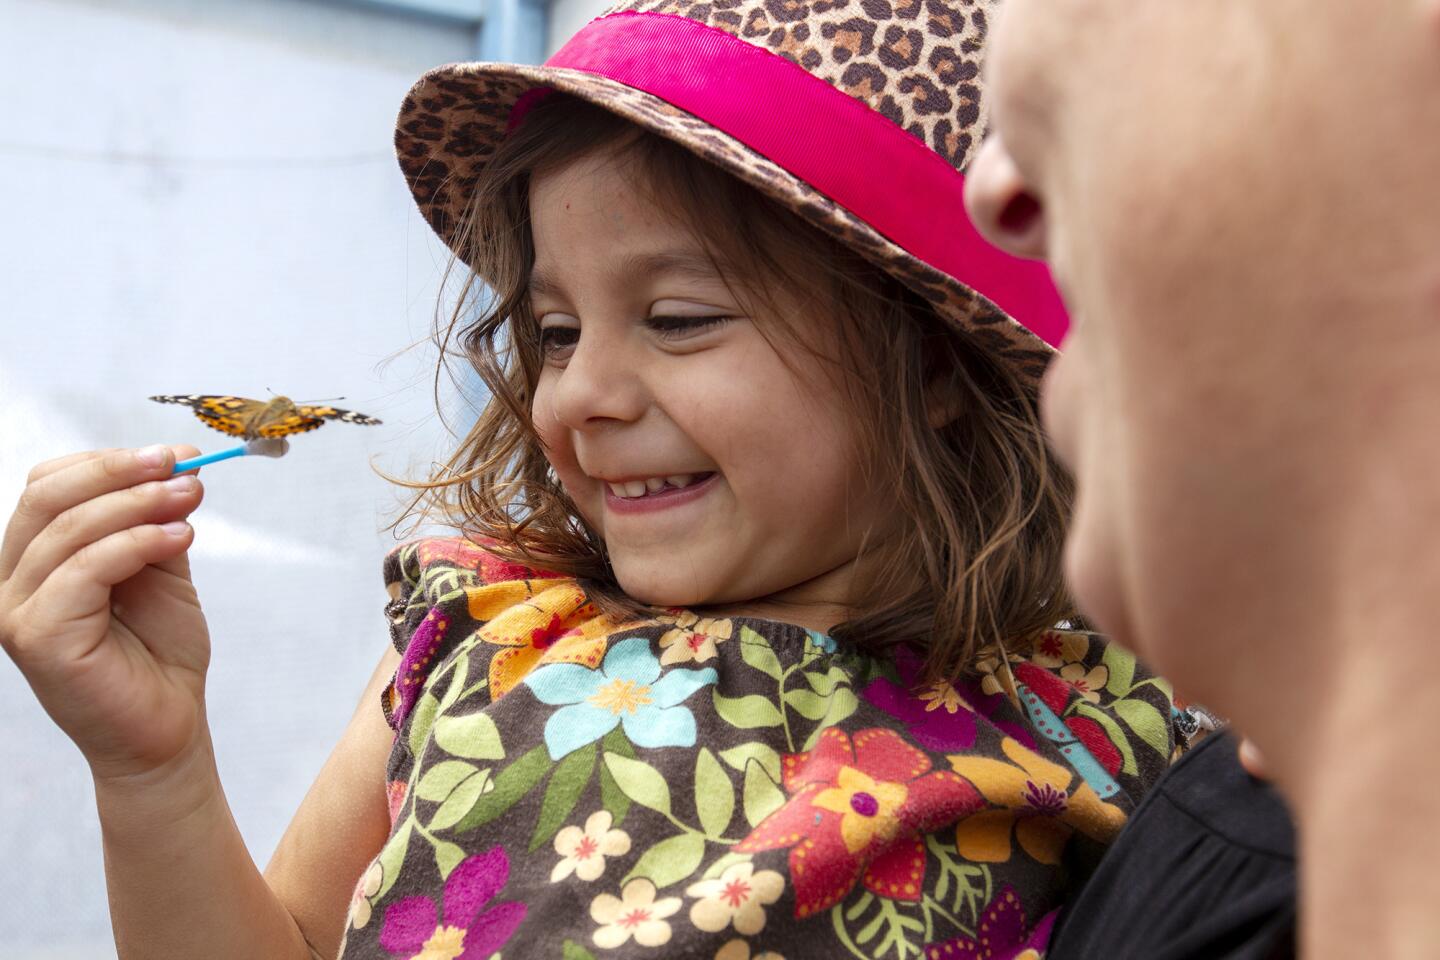 Sarah Bunkowske, 3, meets a painted lady butterfly during Imaginology at the OC Fair & Event Center in Costa Mesa on Friday.